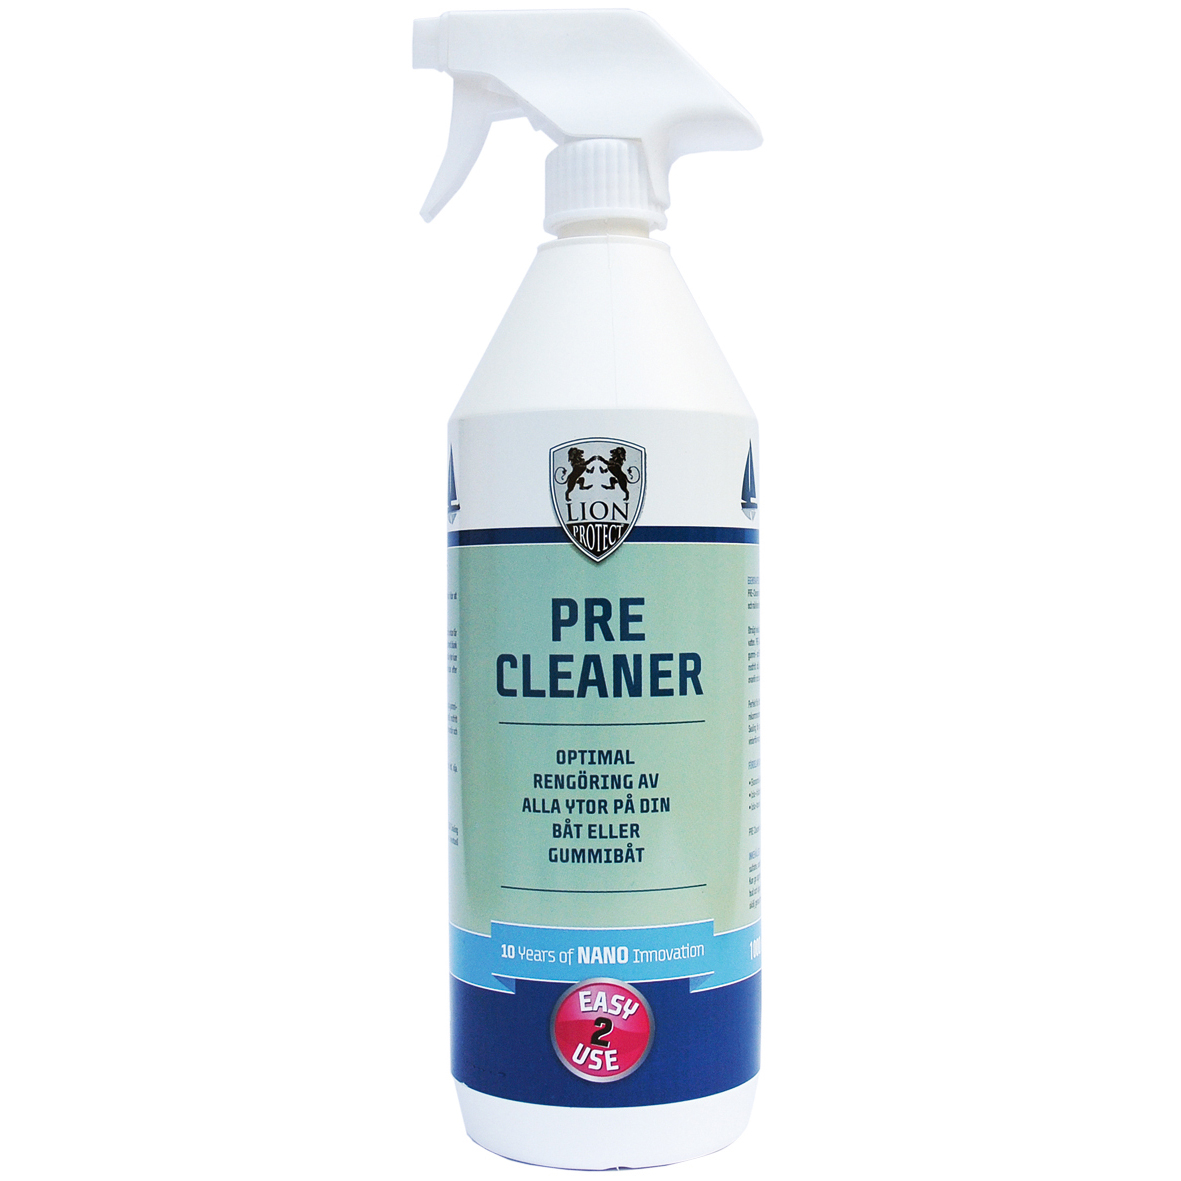 LIONPROTECT PRE CLEANER